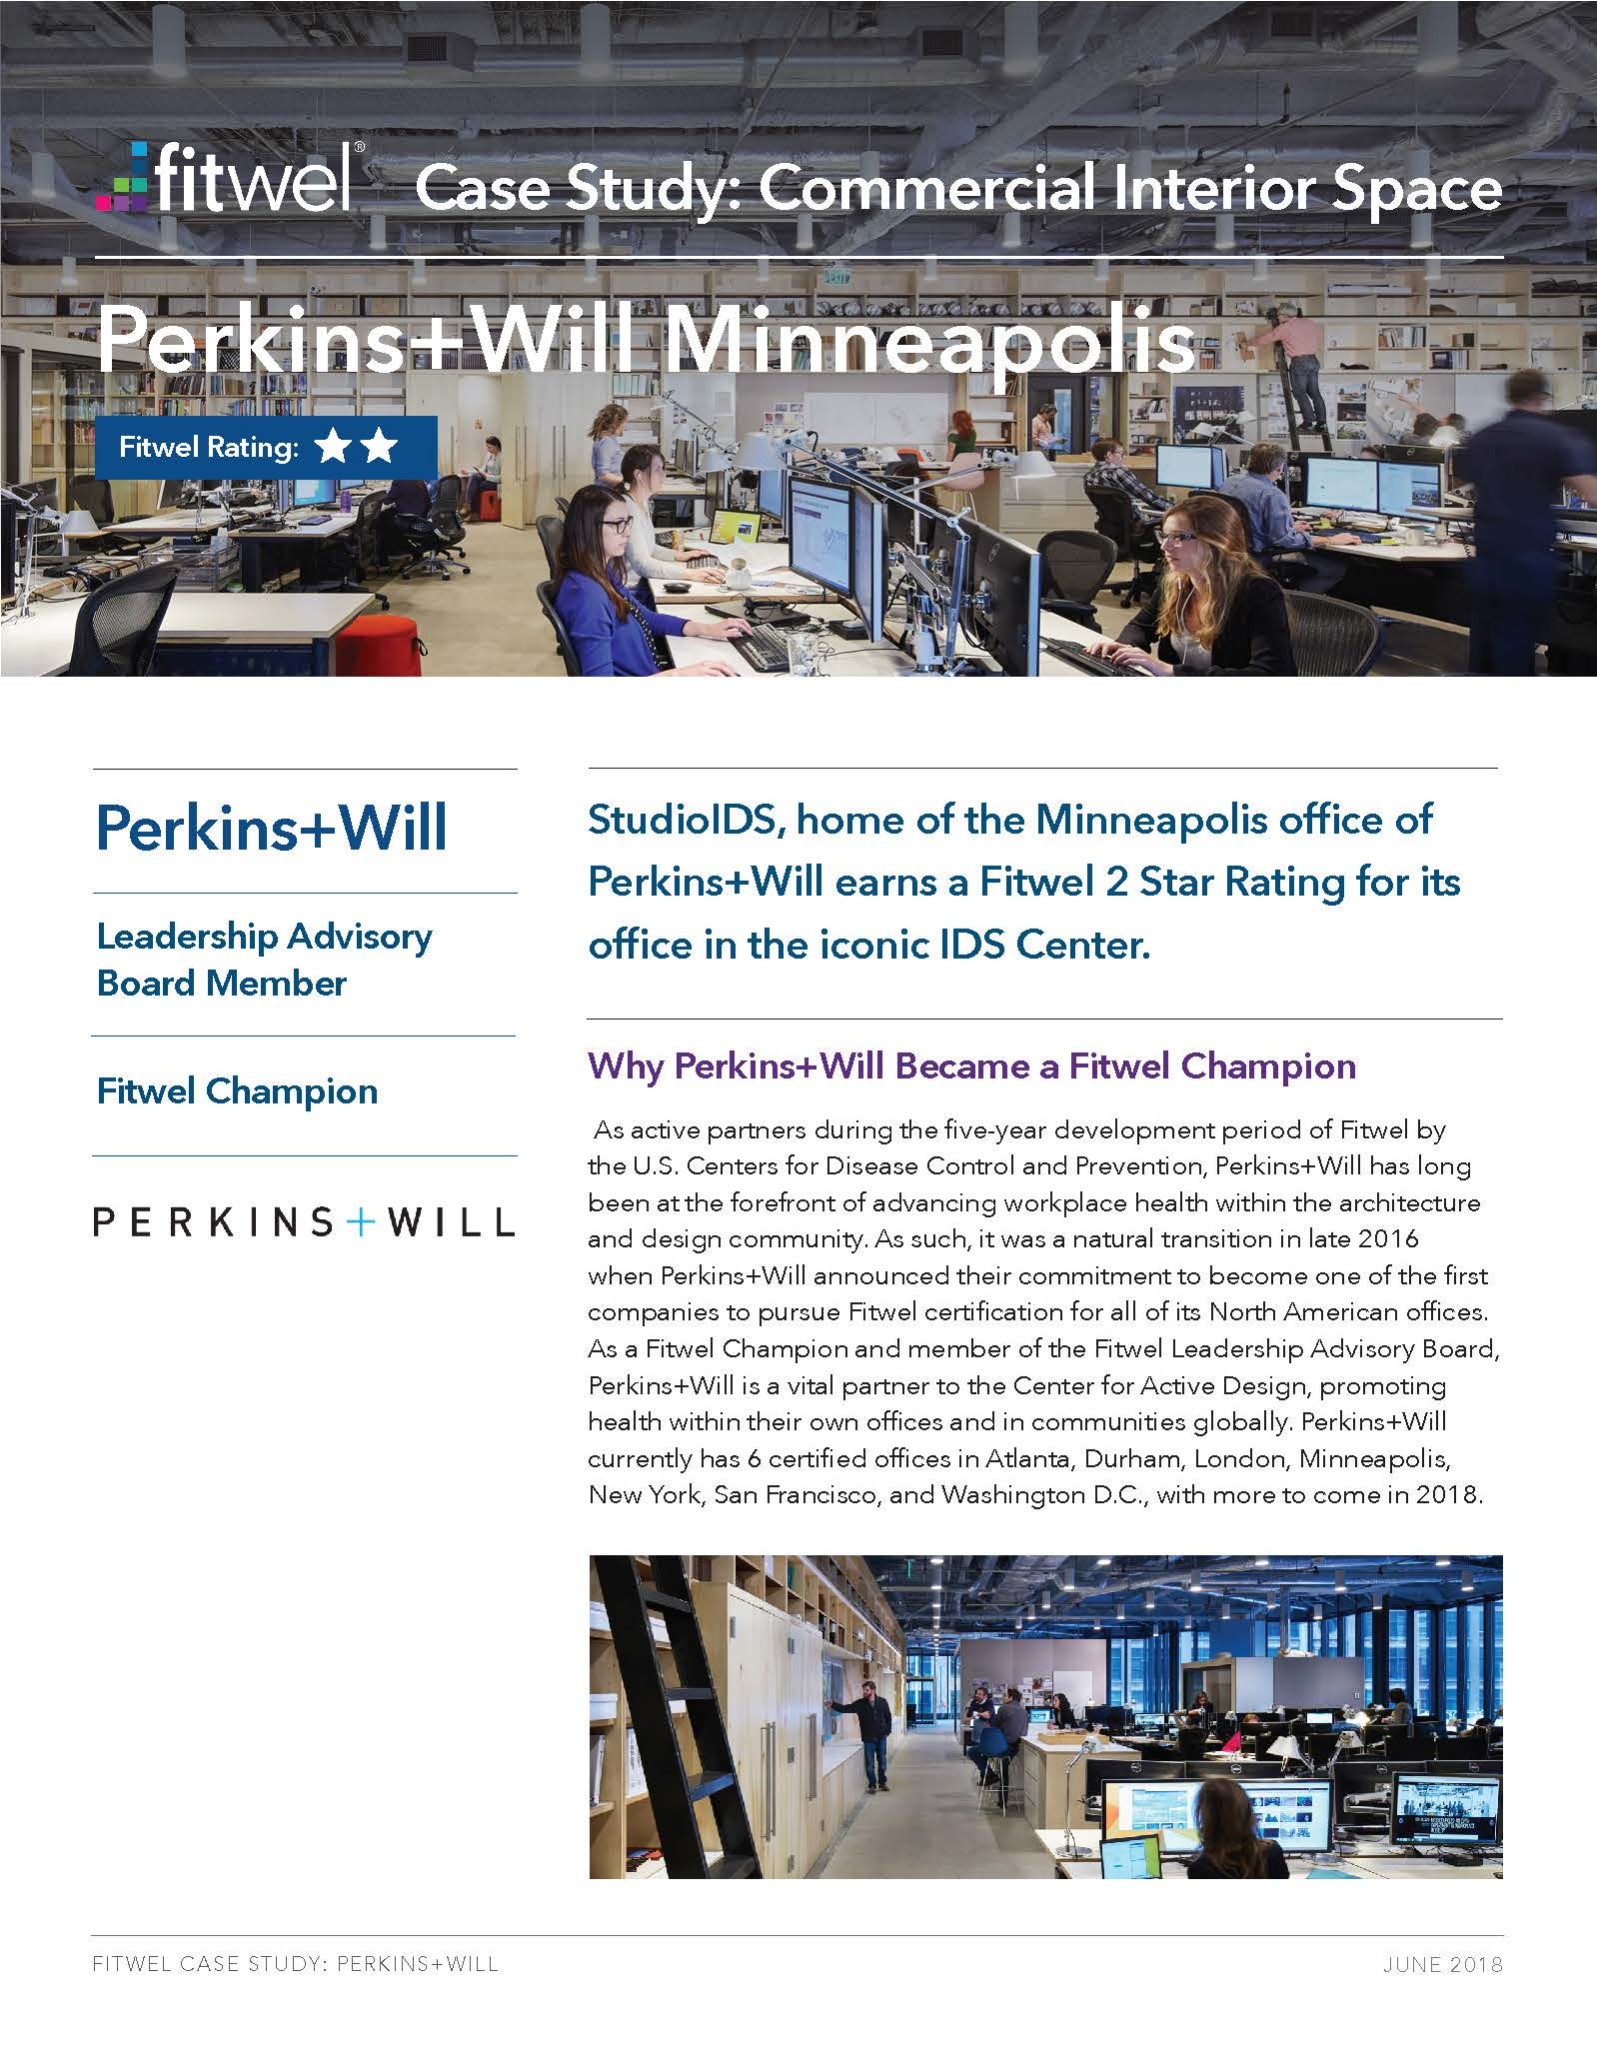 Fitwel Case Study: Commercial Interior Space – Perkins+Will MinneapolisFeatured Image